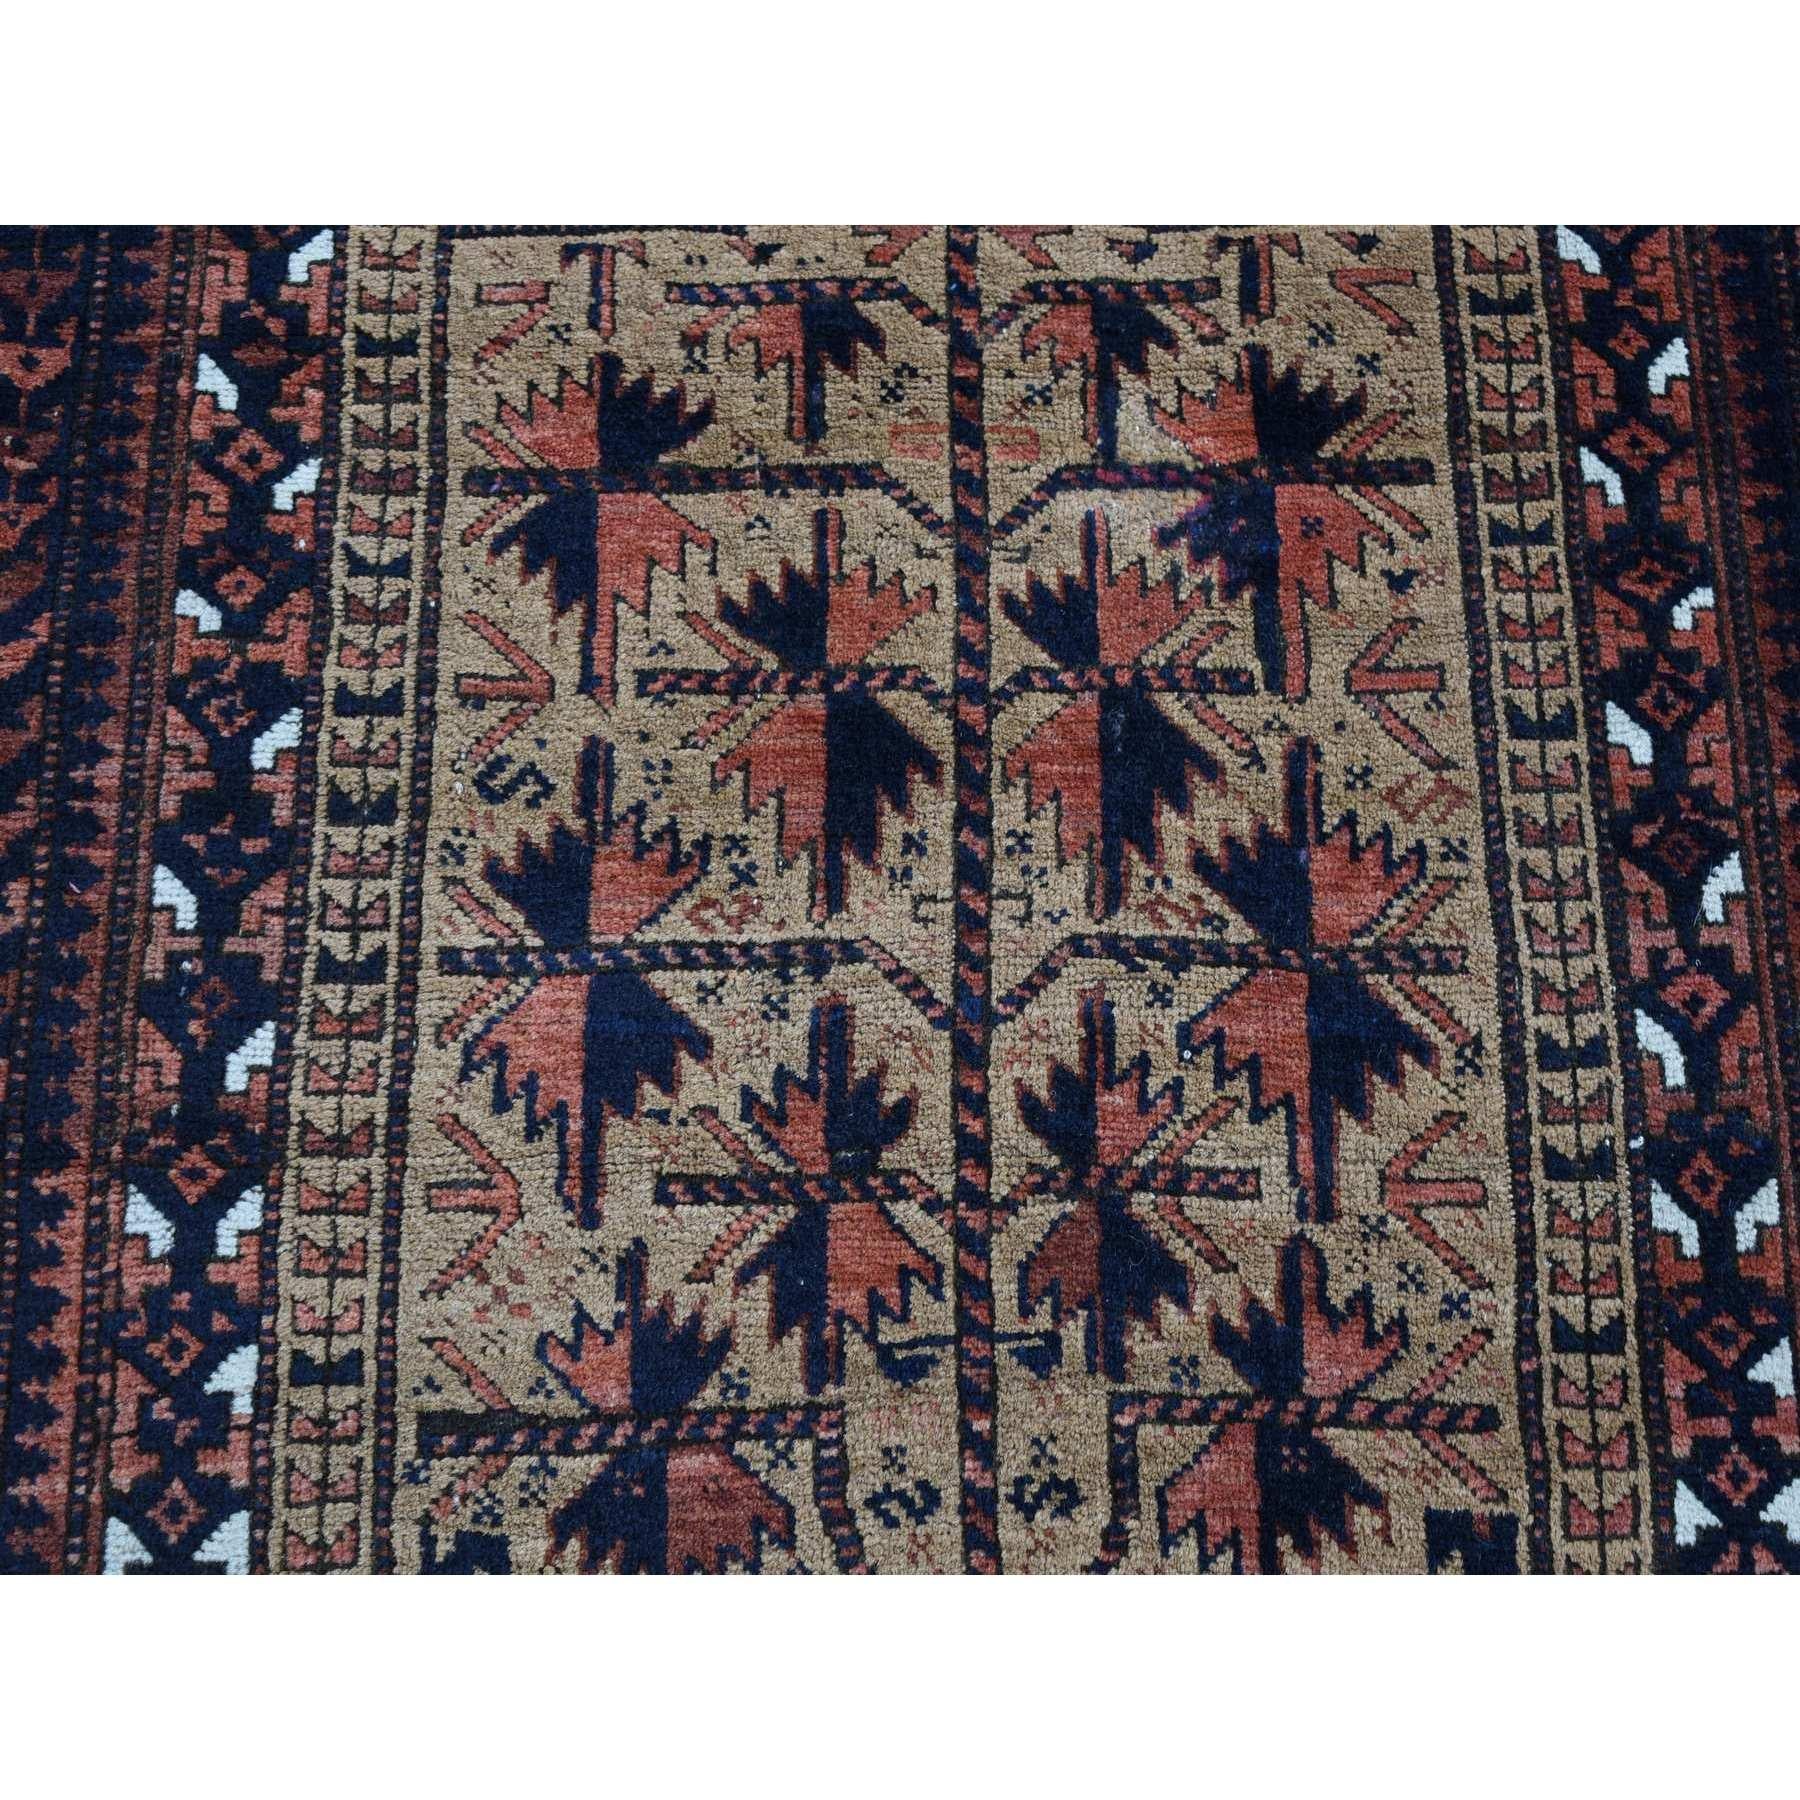 Hand-Knotted Camel Hair, Antique Persian Baluch with Prayer Design, Wool Hand Knotted Rug